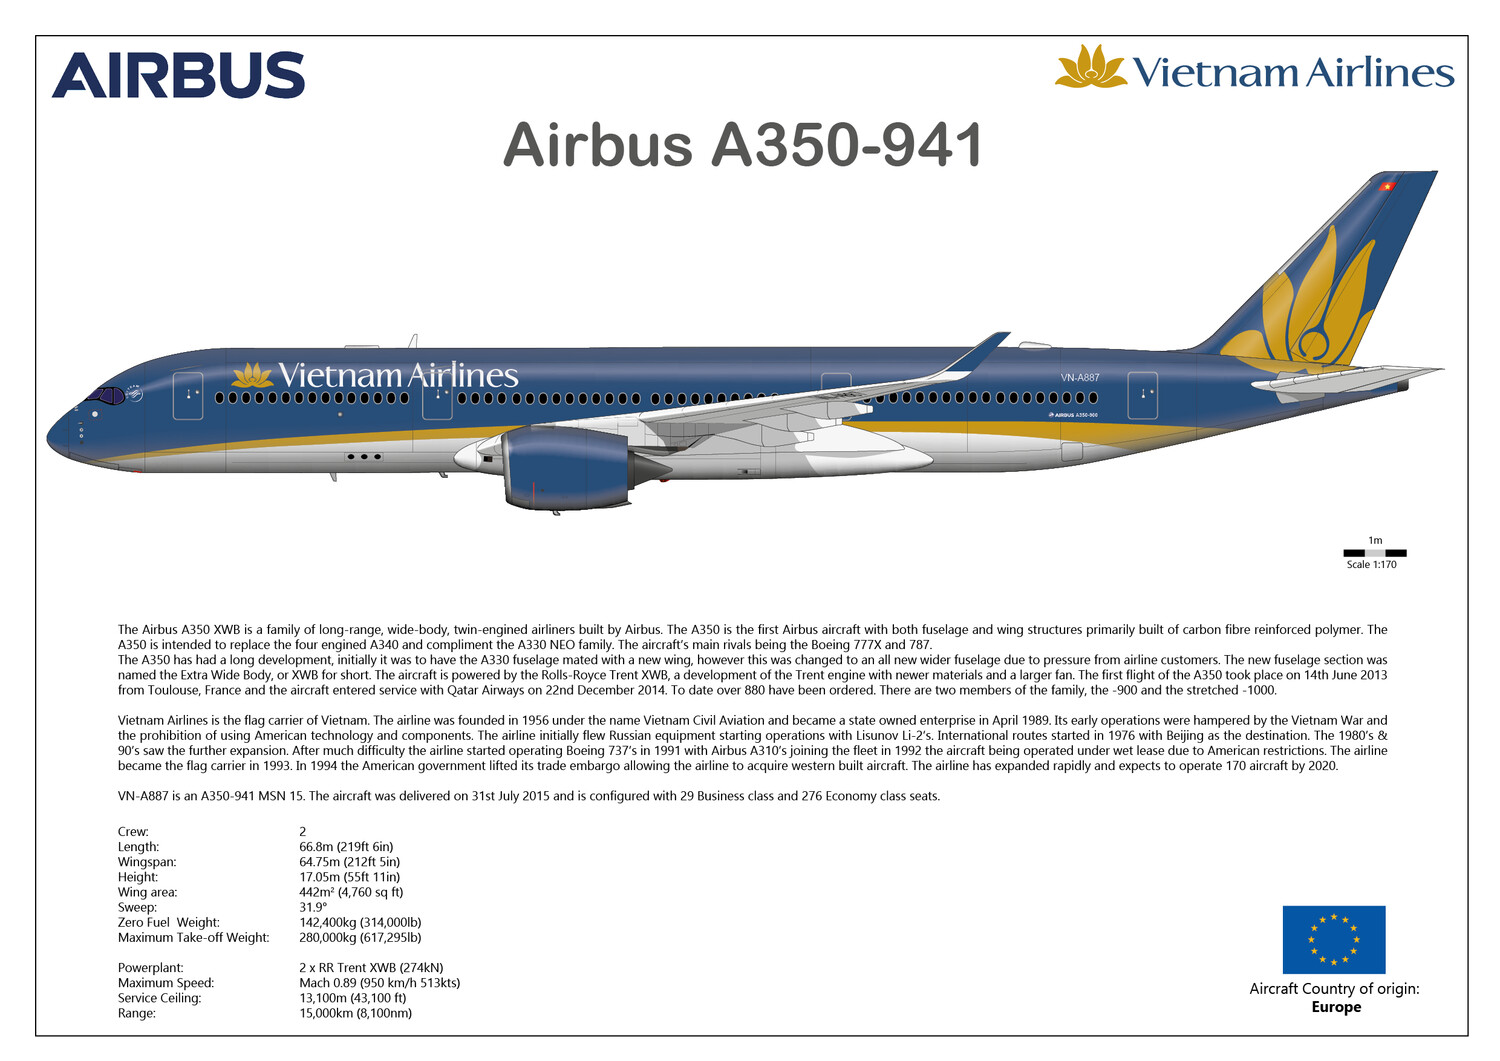 Airbus A350-900 VN-A887 Vietnam Airlines - Layout B